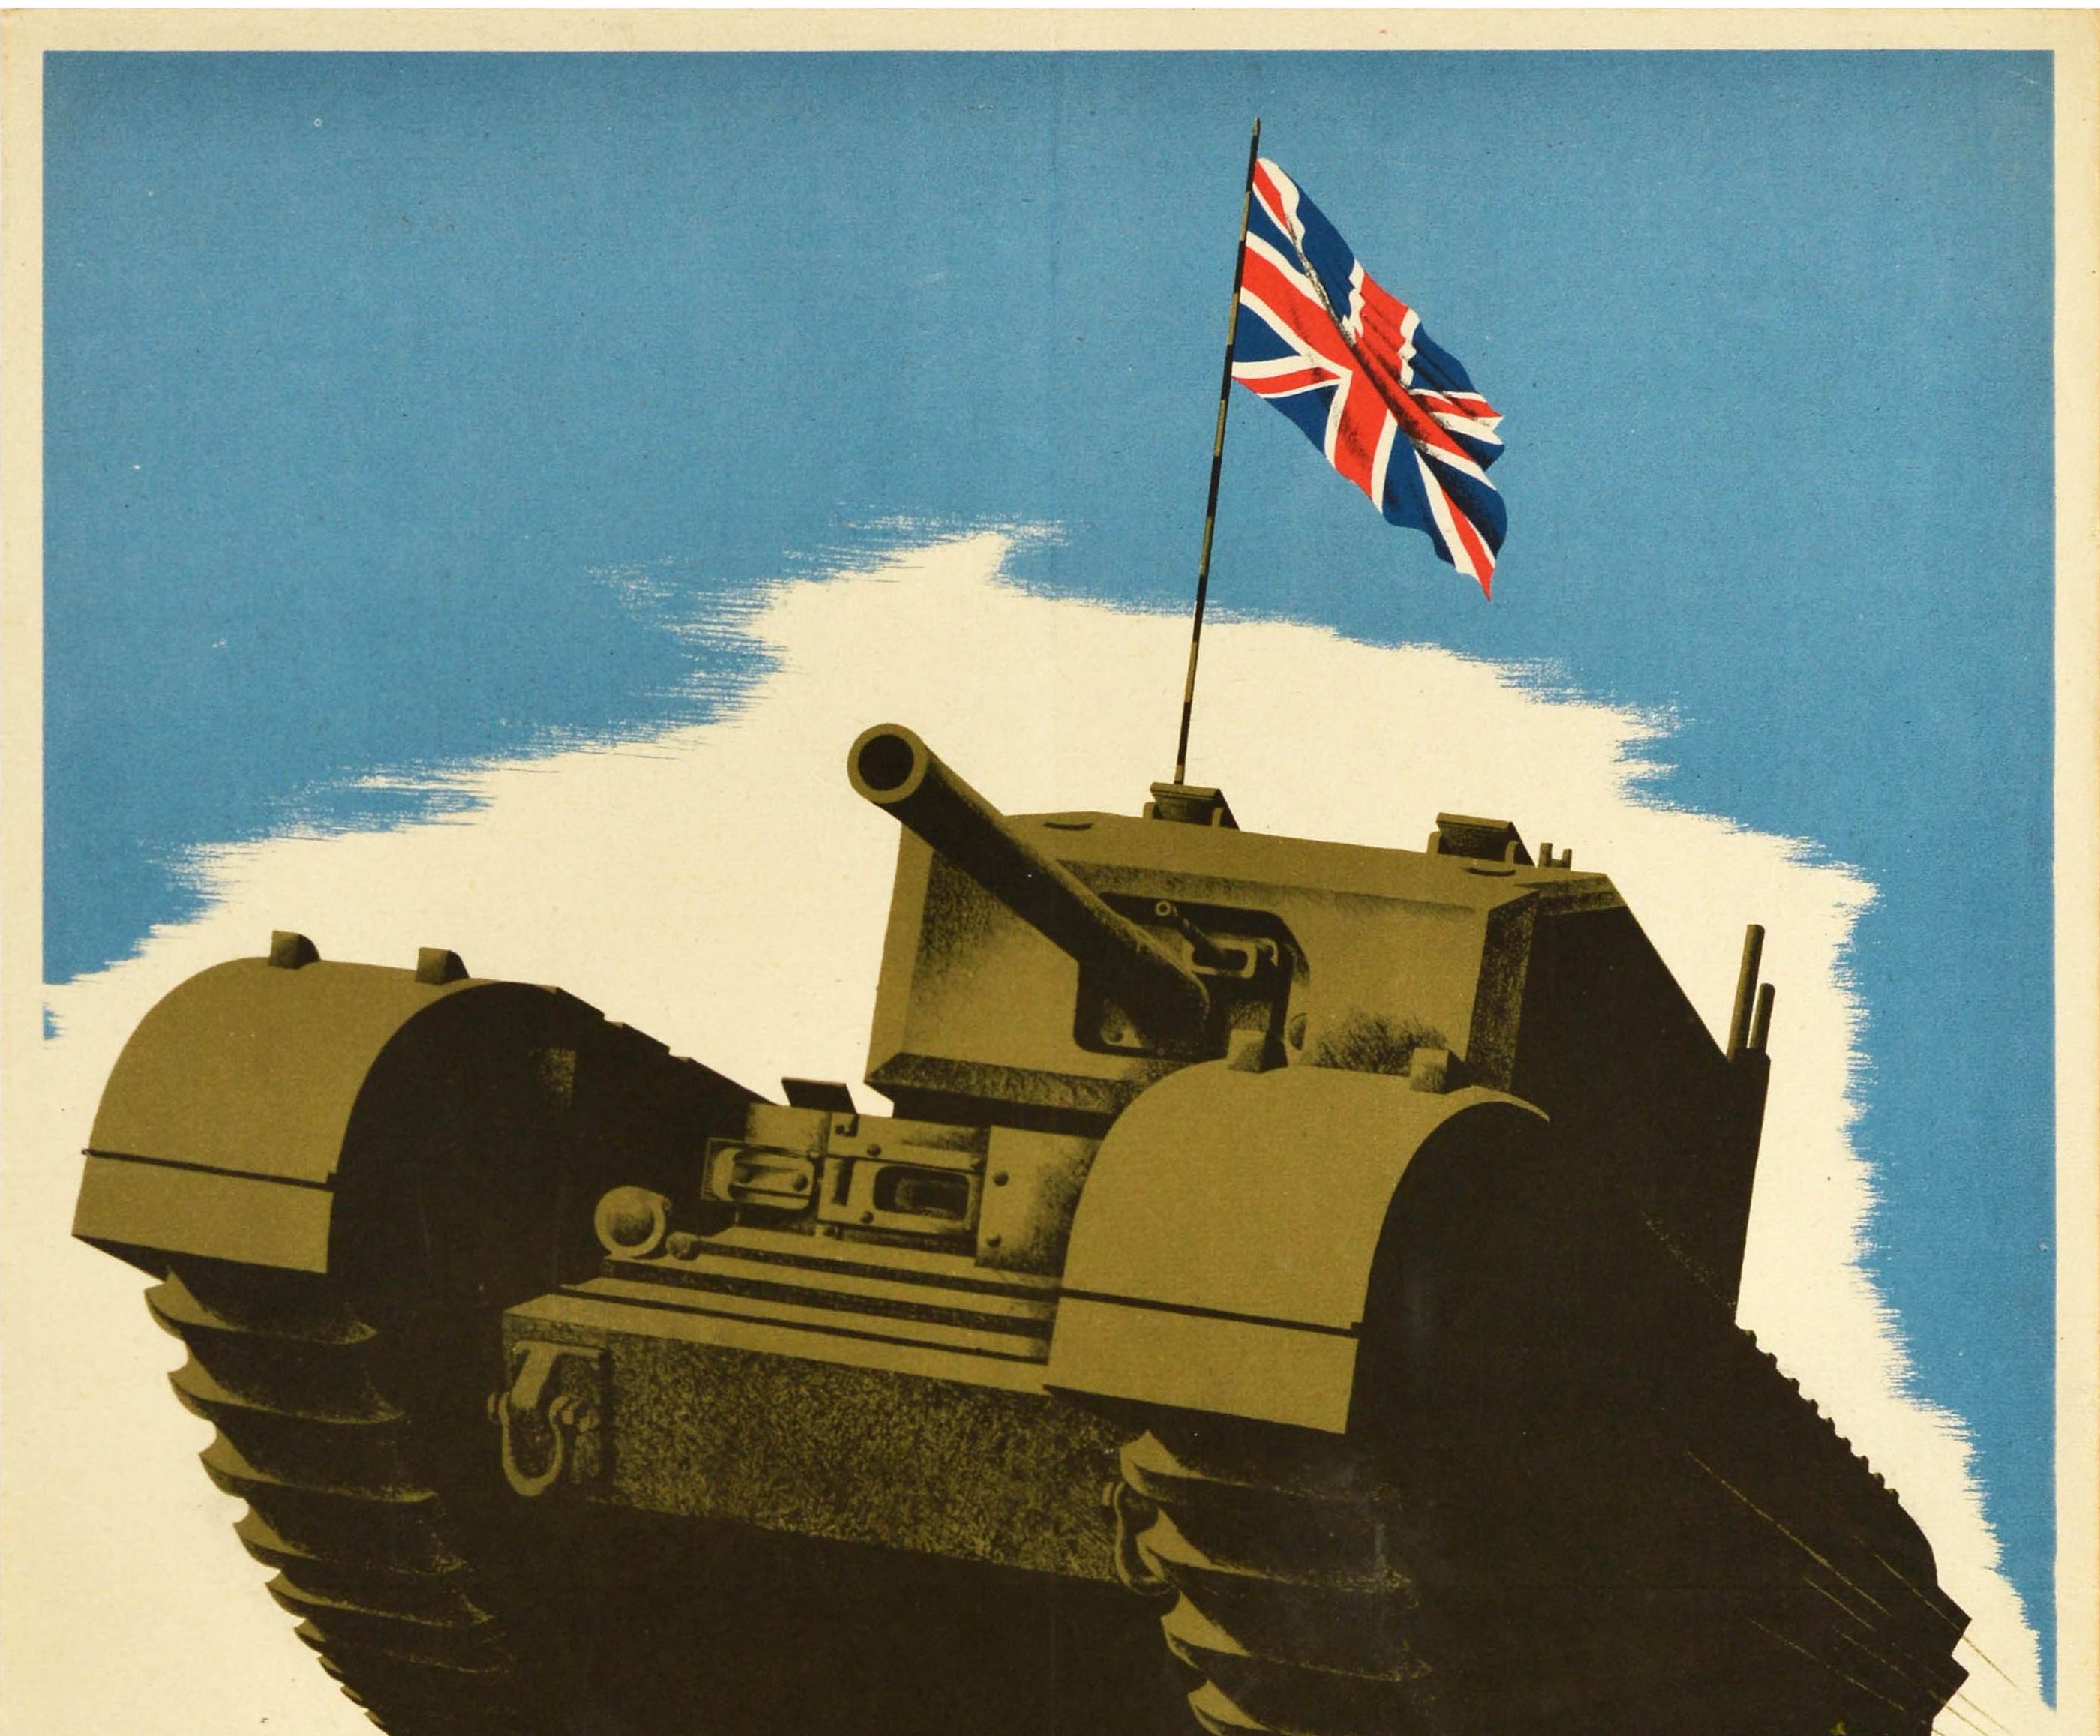 Original vintage World War Two poster - Britain is Pledged to Smash Japan - featuring an image of a tank charging over a muddy hill and flying the Union Jack flag against the blue sky background, the text in bold white lettering on the black border